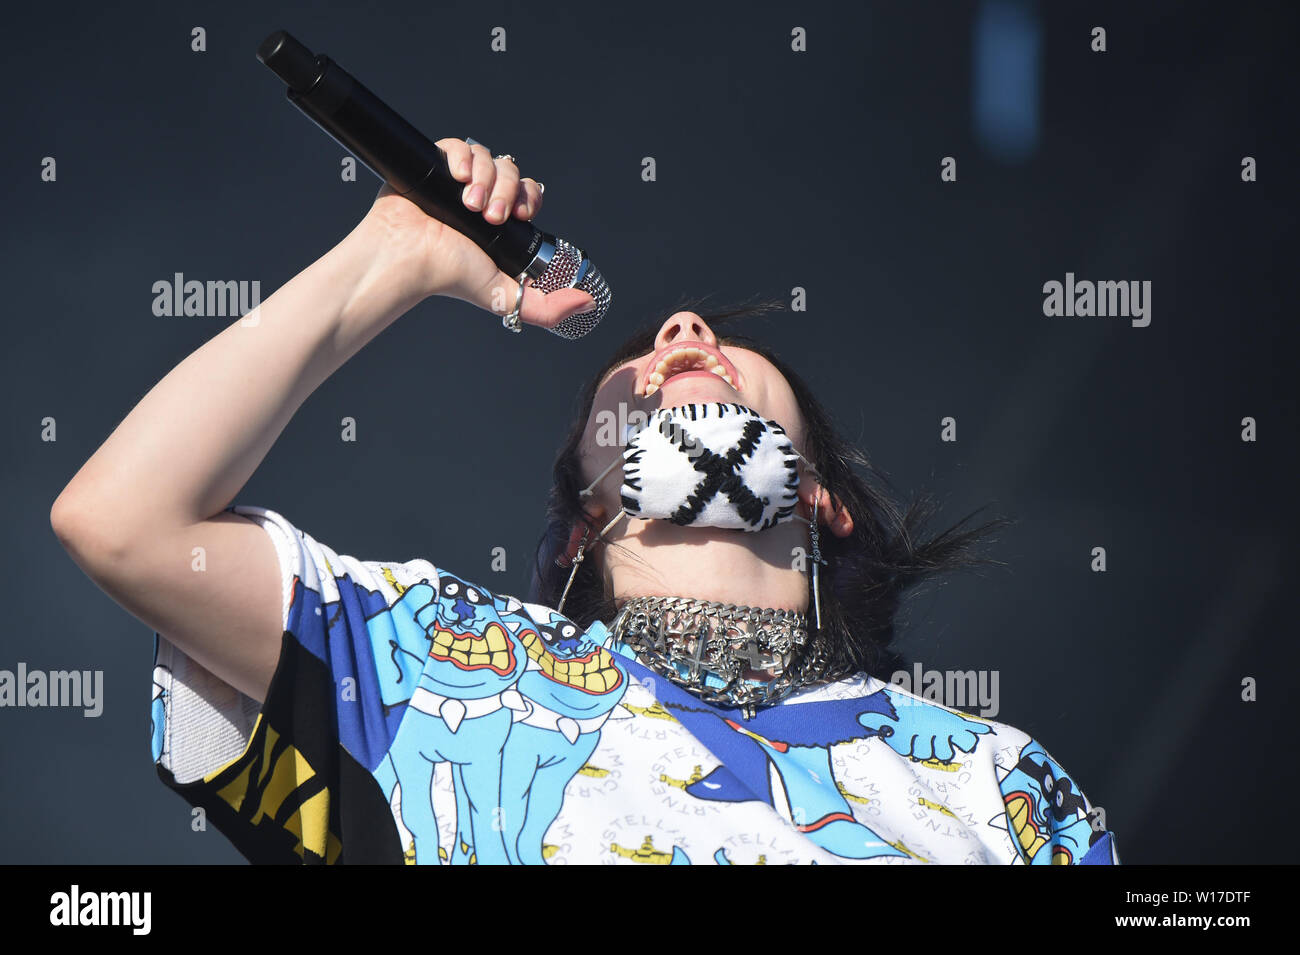 Glastonbury, Pilton, Somerset, UK. 30th June 2019. Billie Eilish performs on the Other stage at Glastonbury Festival on 30th June 2019. Picture by Tabatha Fireman / Female Perspective Credit: Female Perspective/Alamy Live News Stock Photo